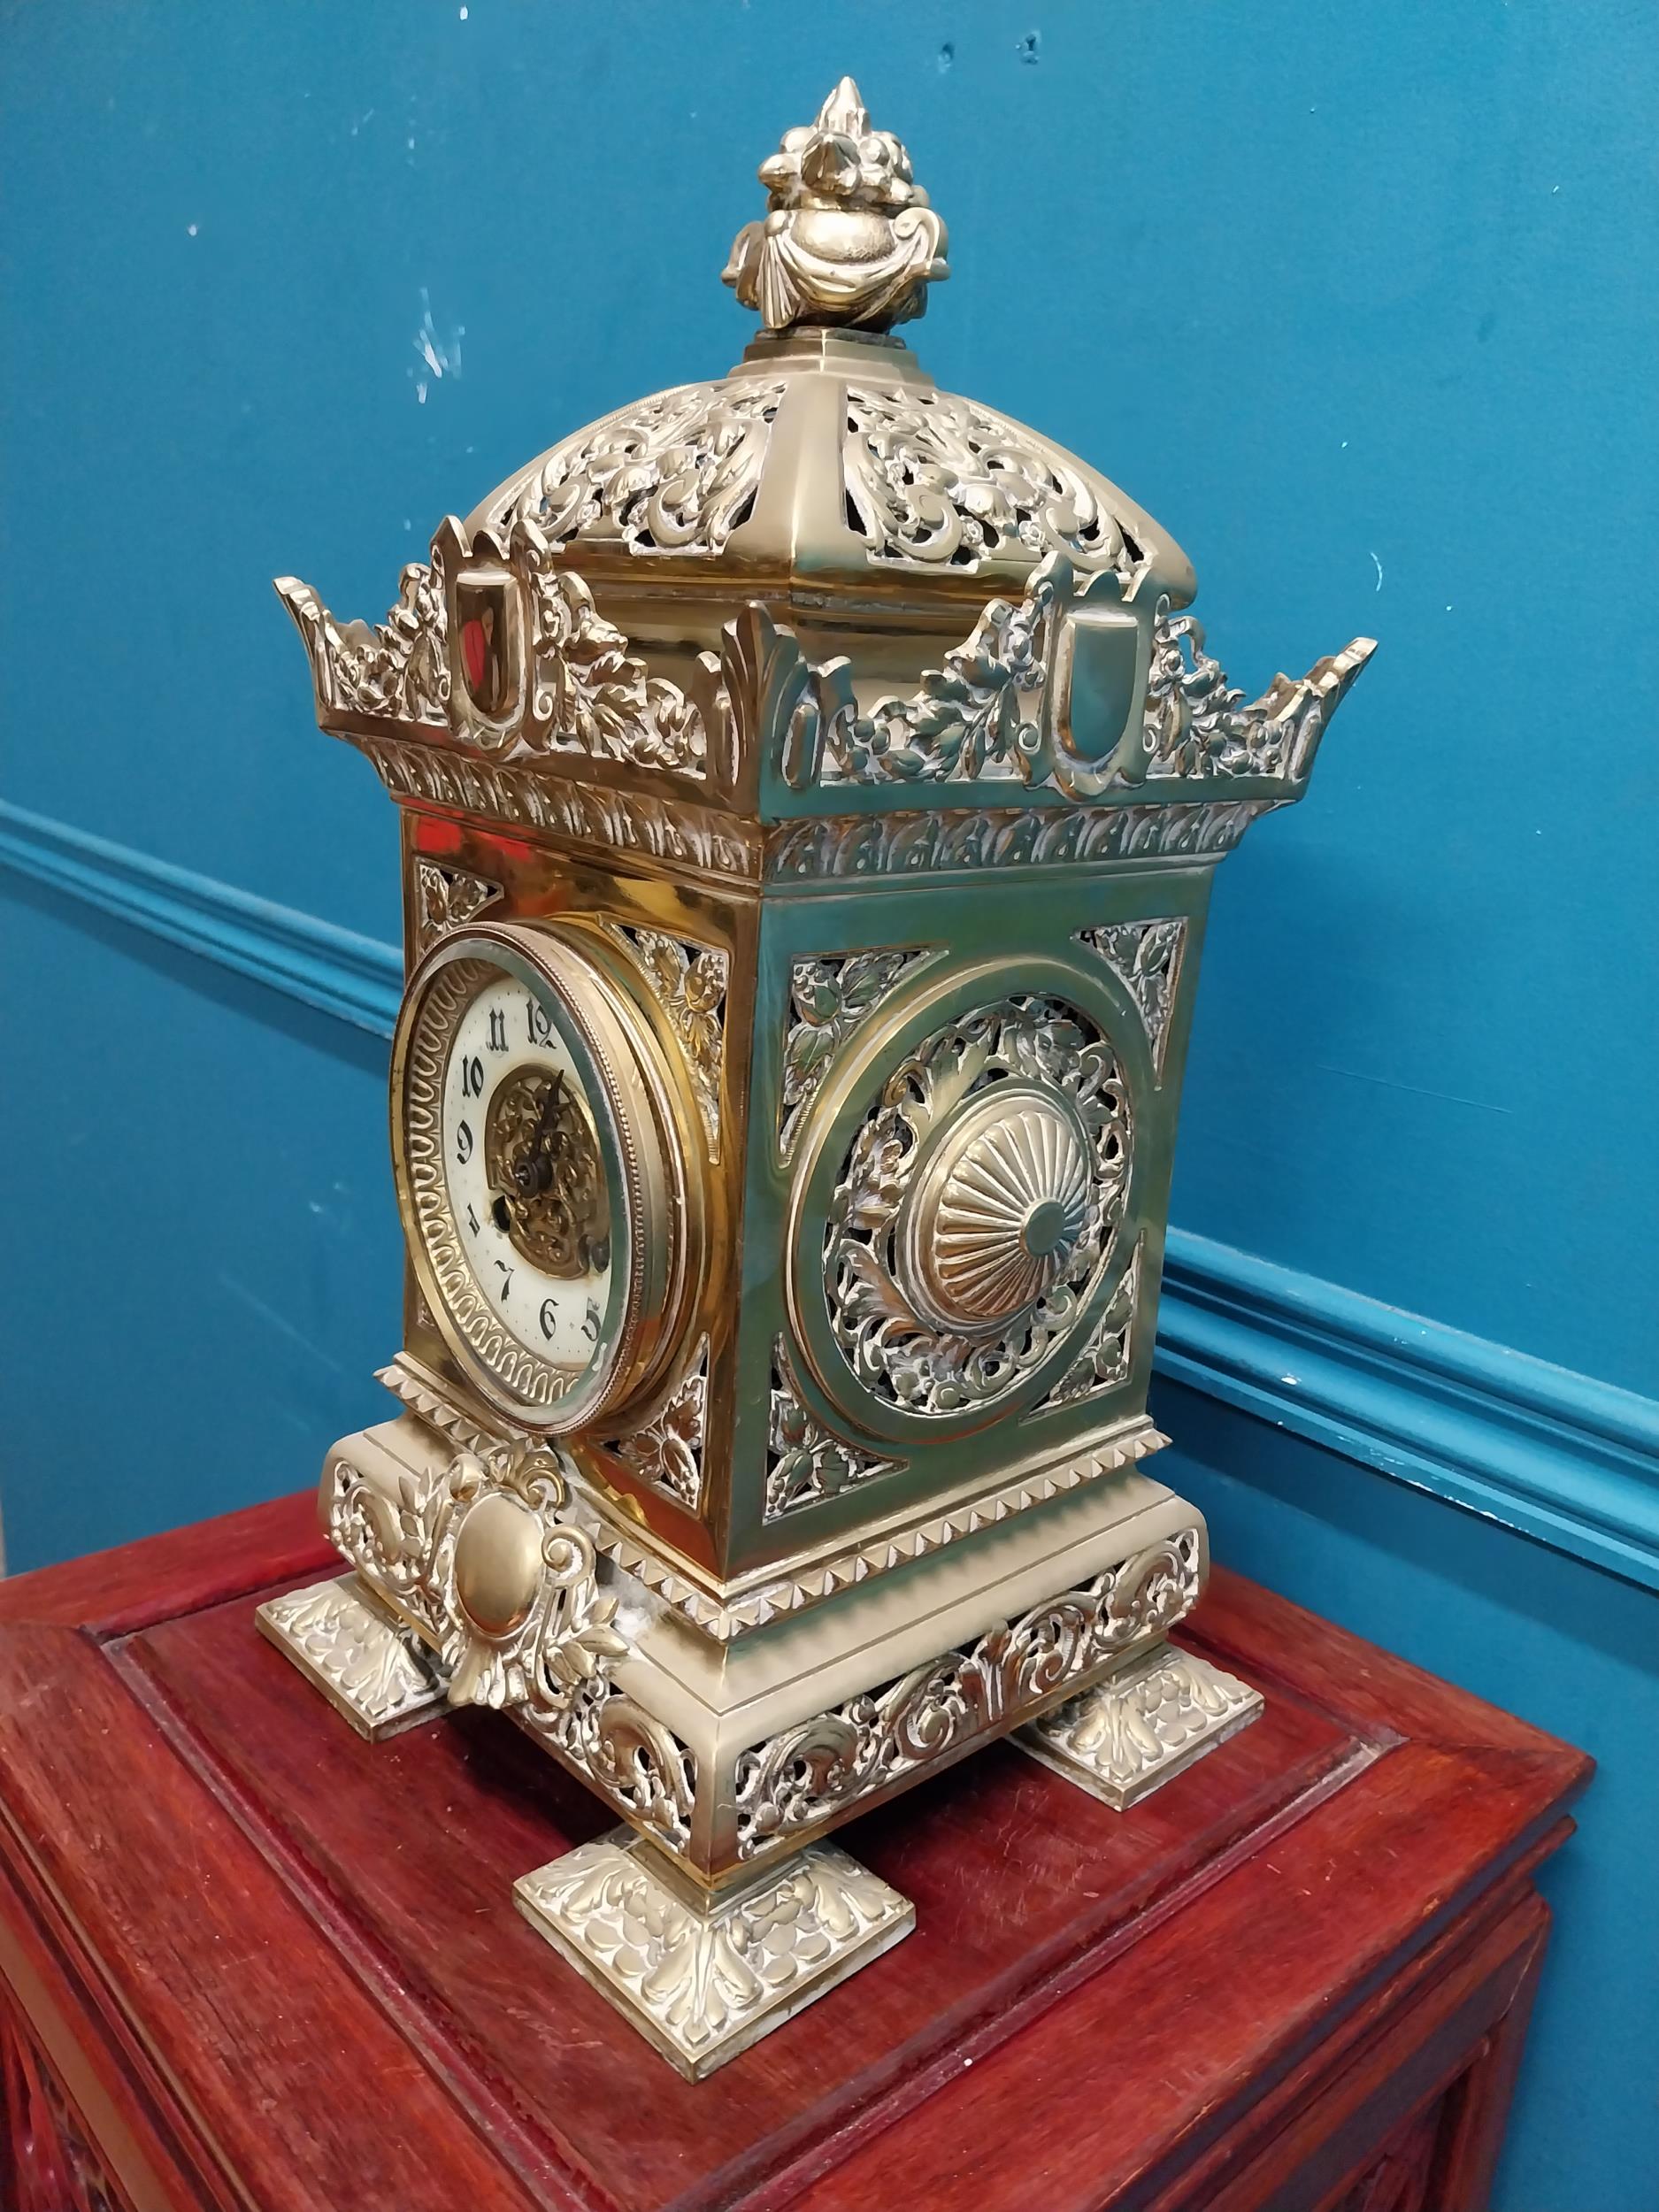 Decorative brass mantle clock in the Victorian style {39 cm H x 19 cm W x 19 cm D}. - Image 3 of 9